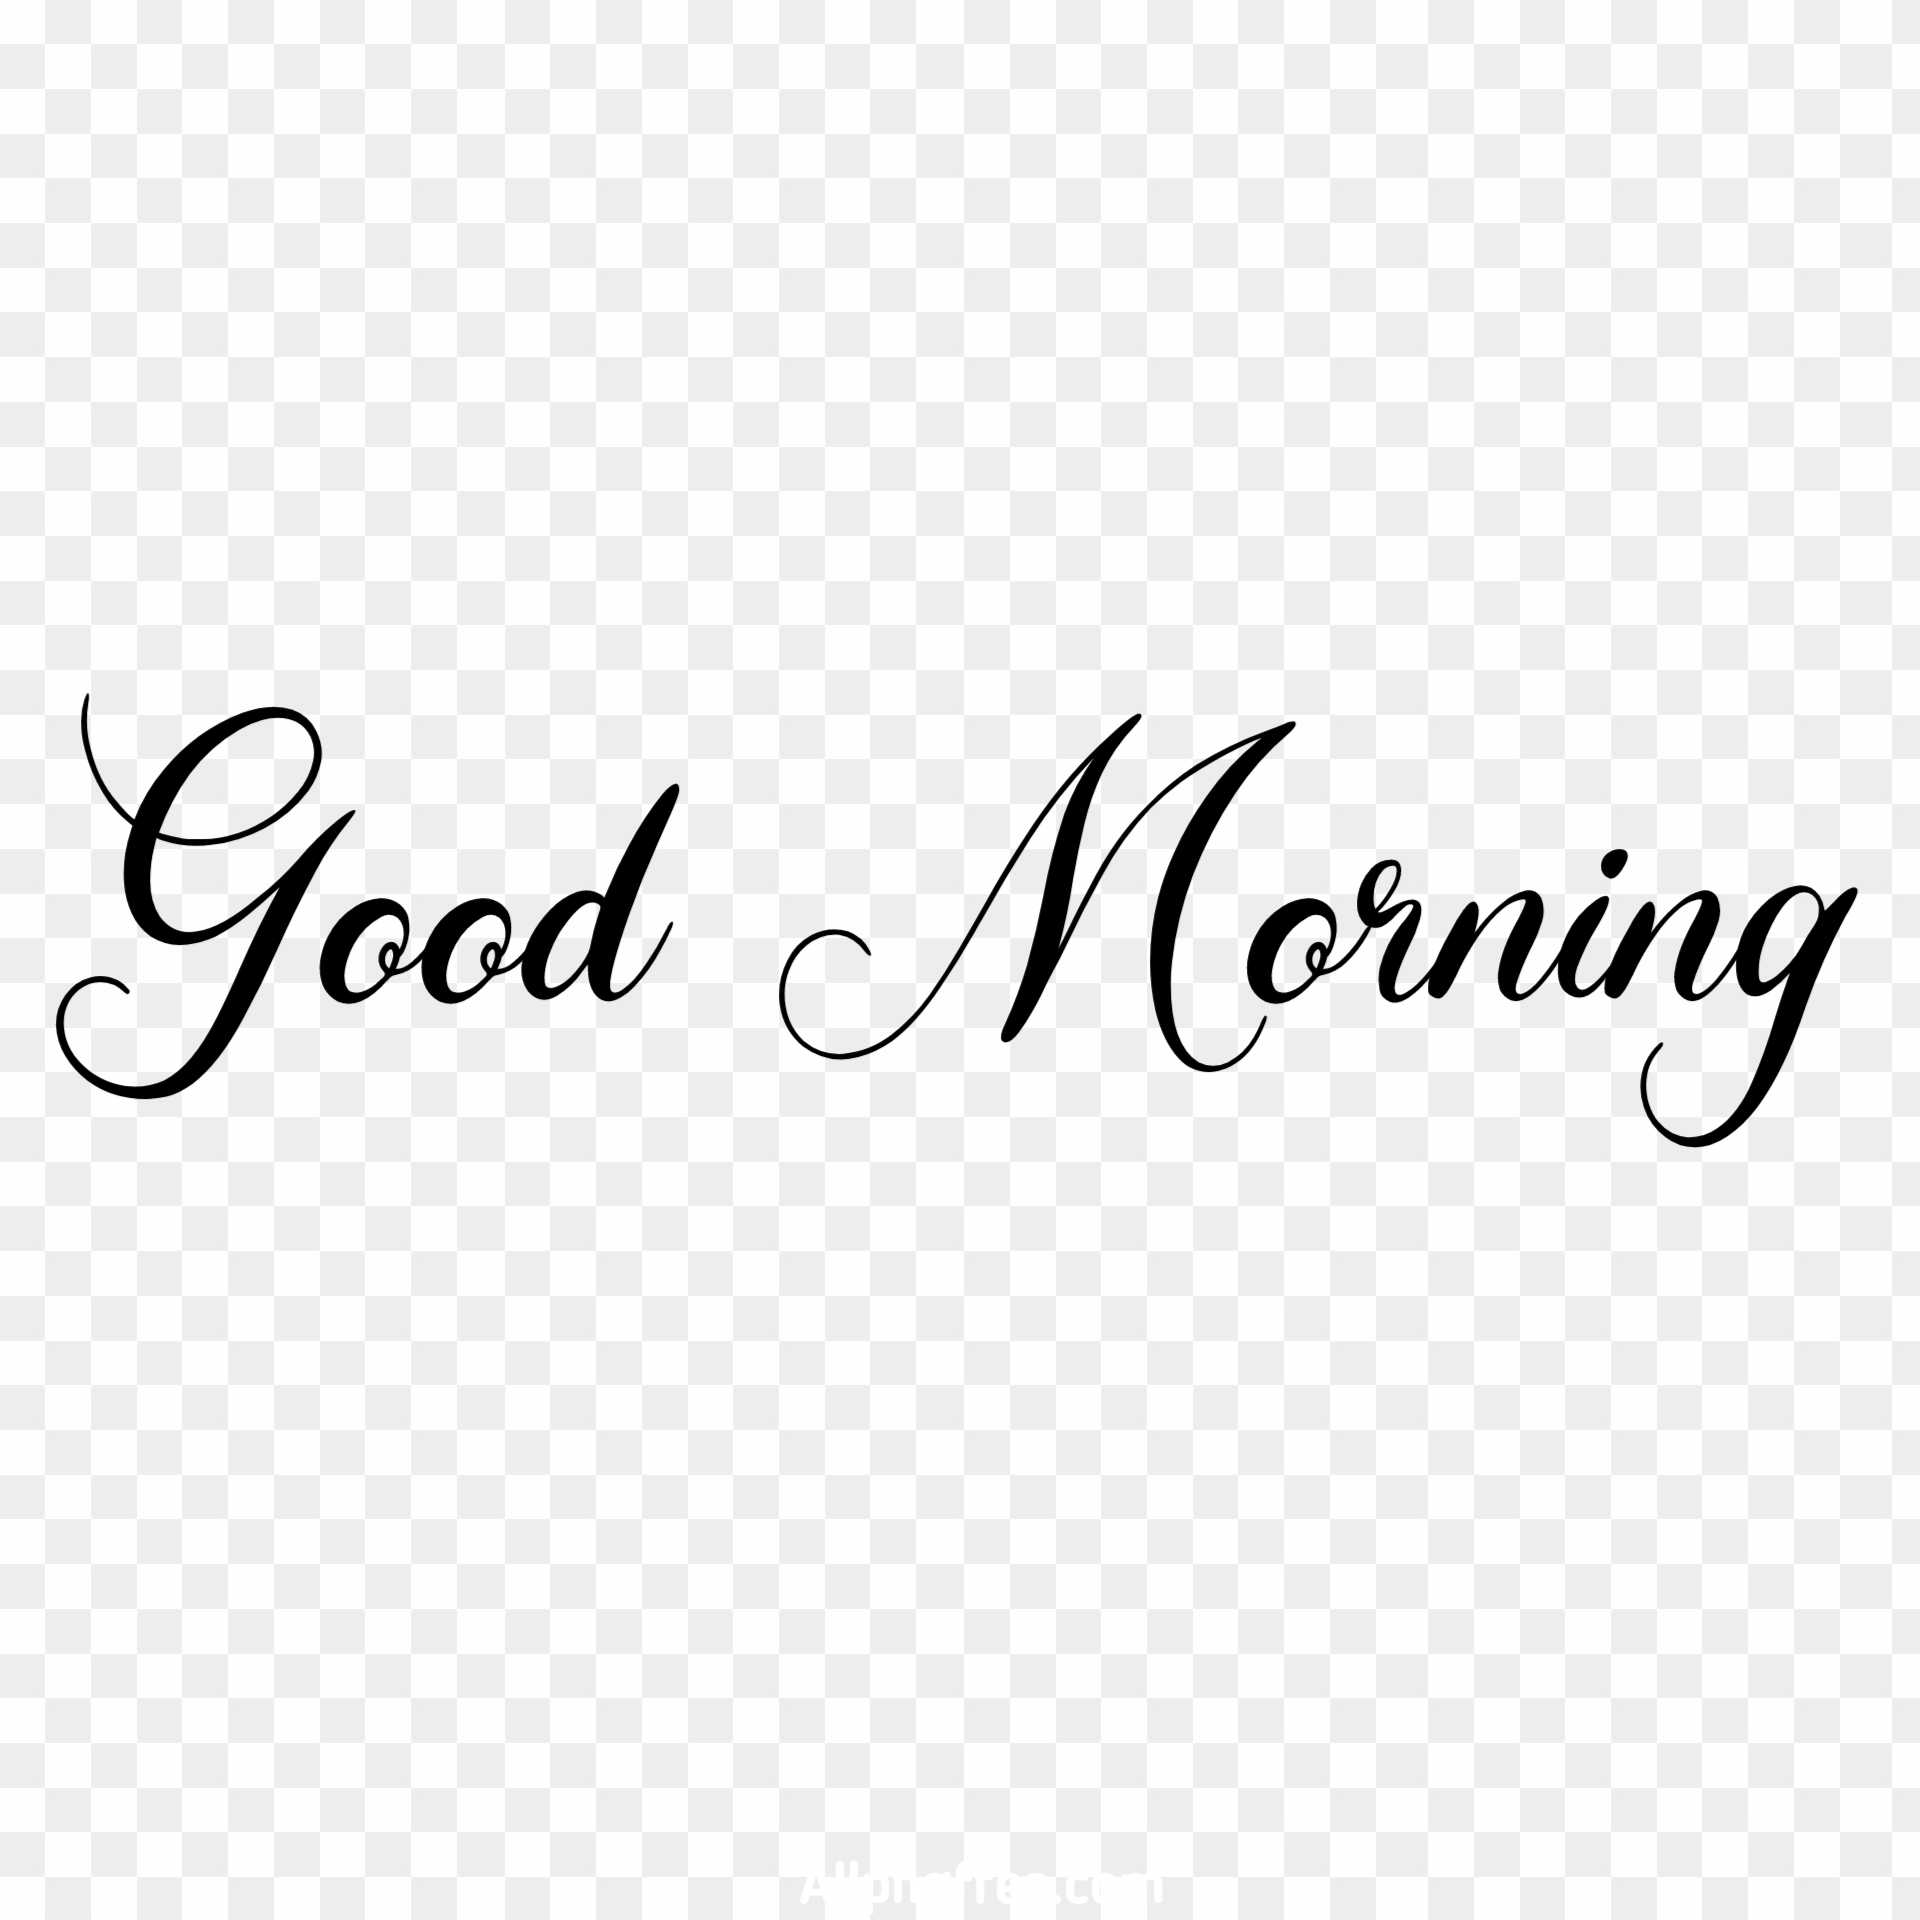 Good morning in English handwriting PNG images